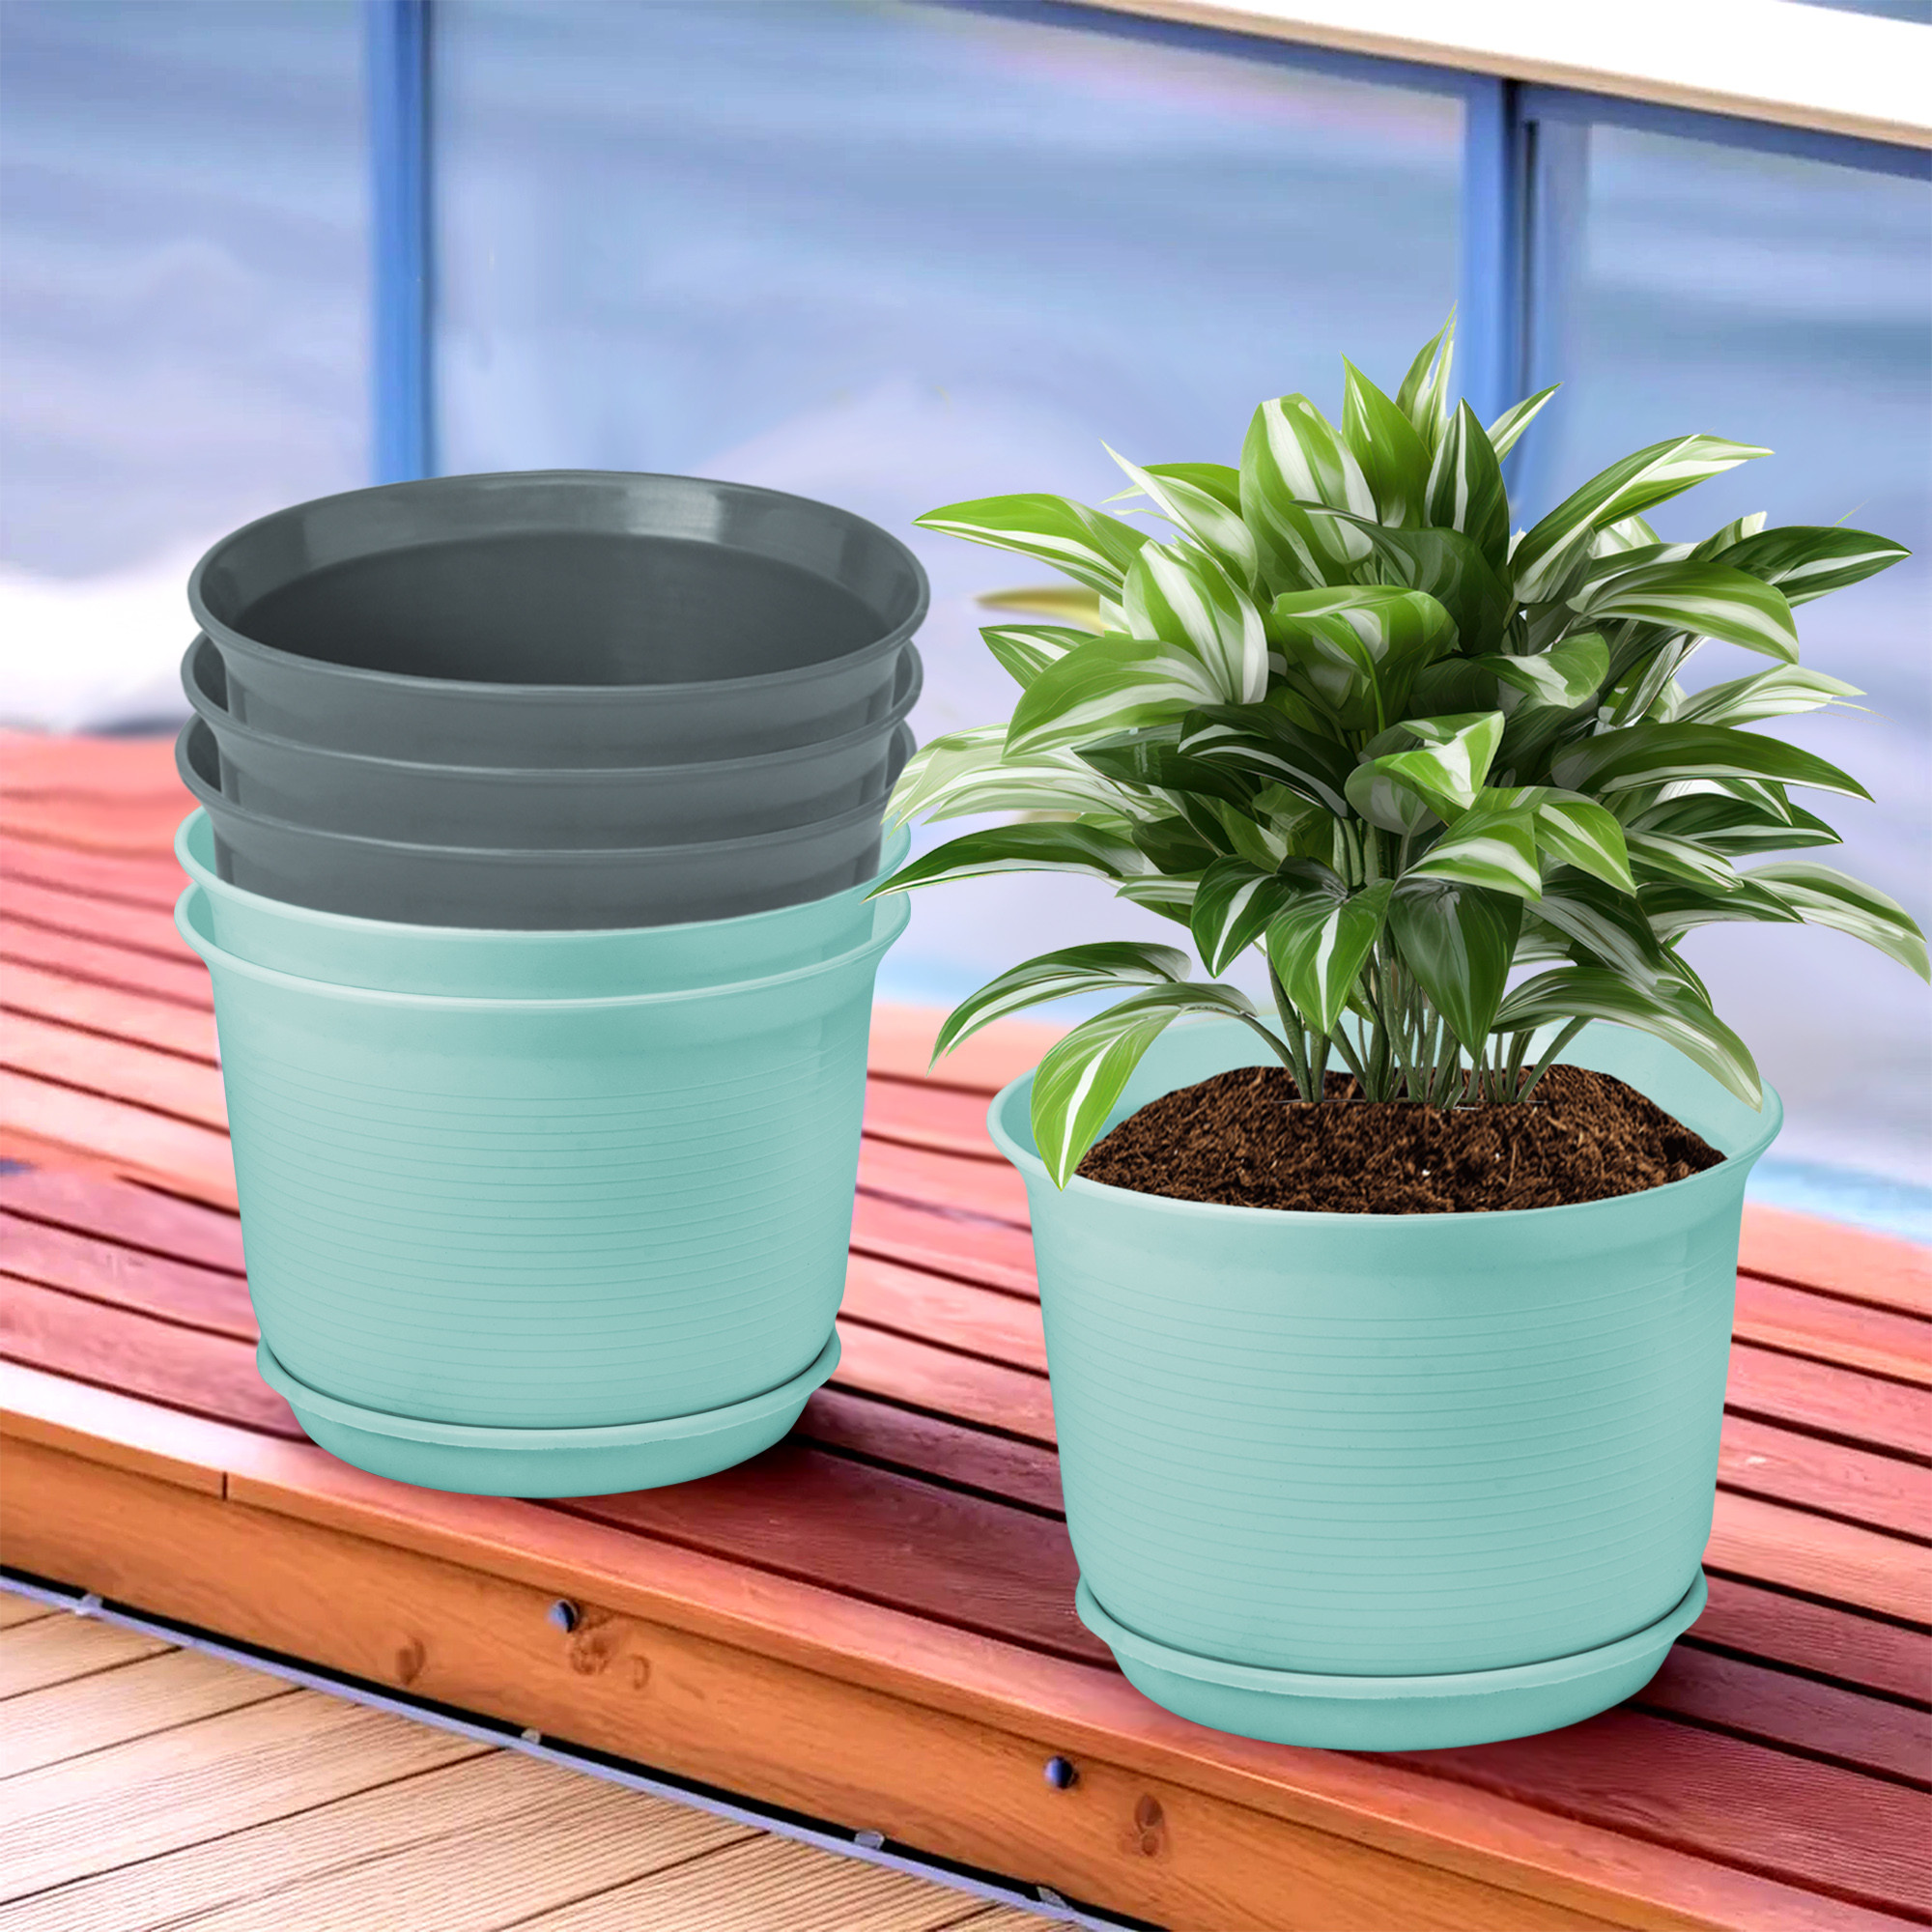 Kuber Industries Flower Pot with Bottom Tray | Flower Planter Pots | Planters for Home-Lawns & Garden | Flower Planter for Balcony | Plain Sawera | 10 Inch | Sky Blue & Gray